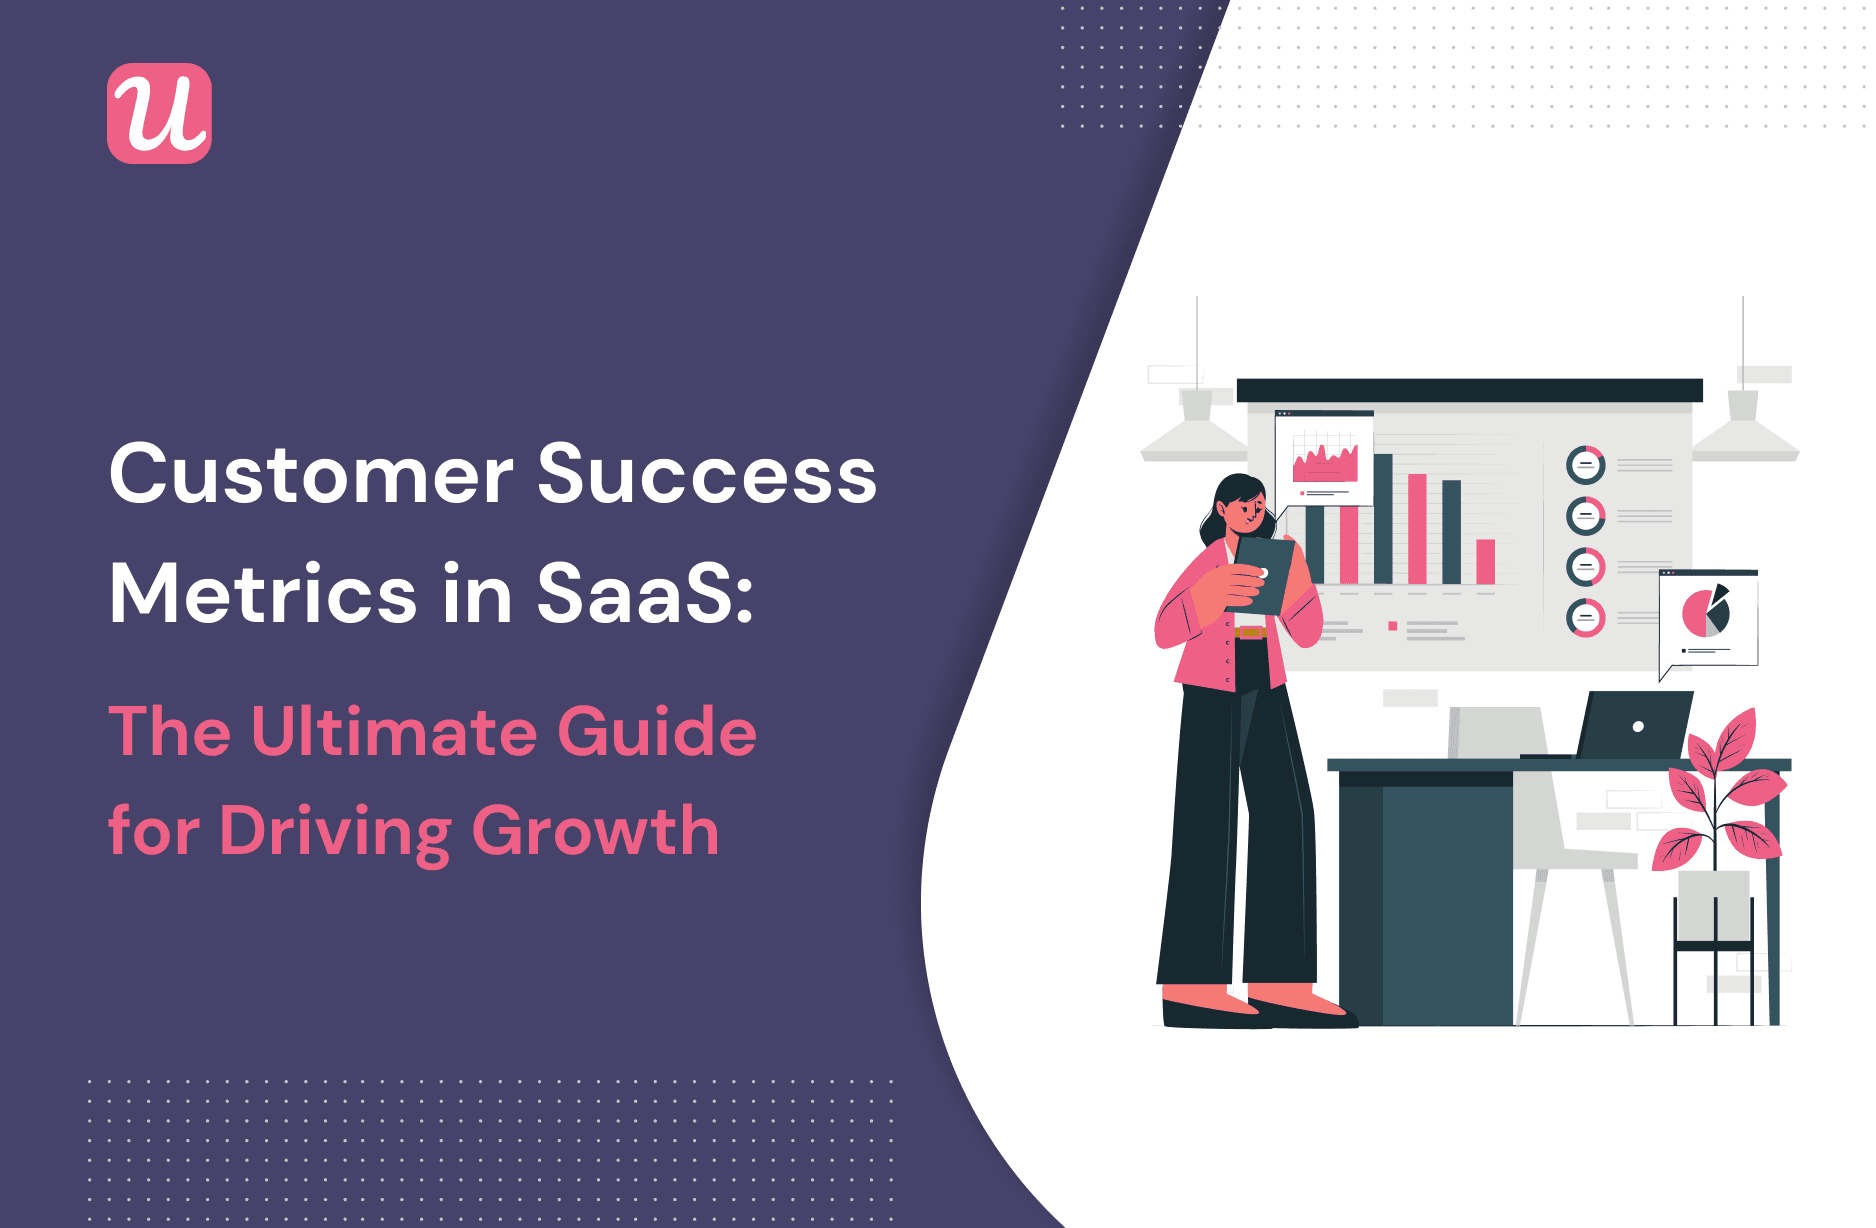 Customer Success Metrics in SaaS: The Ultimate Guide For Driving Growth